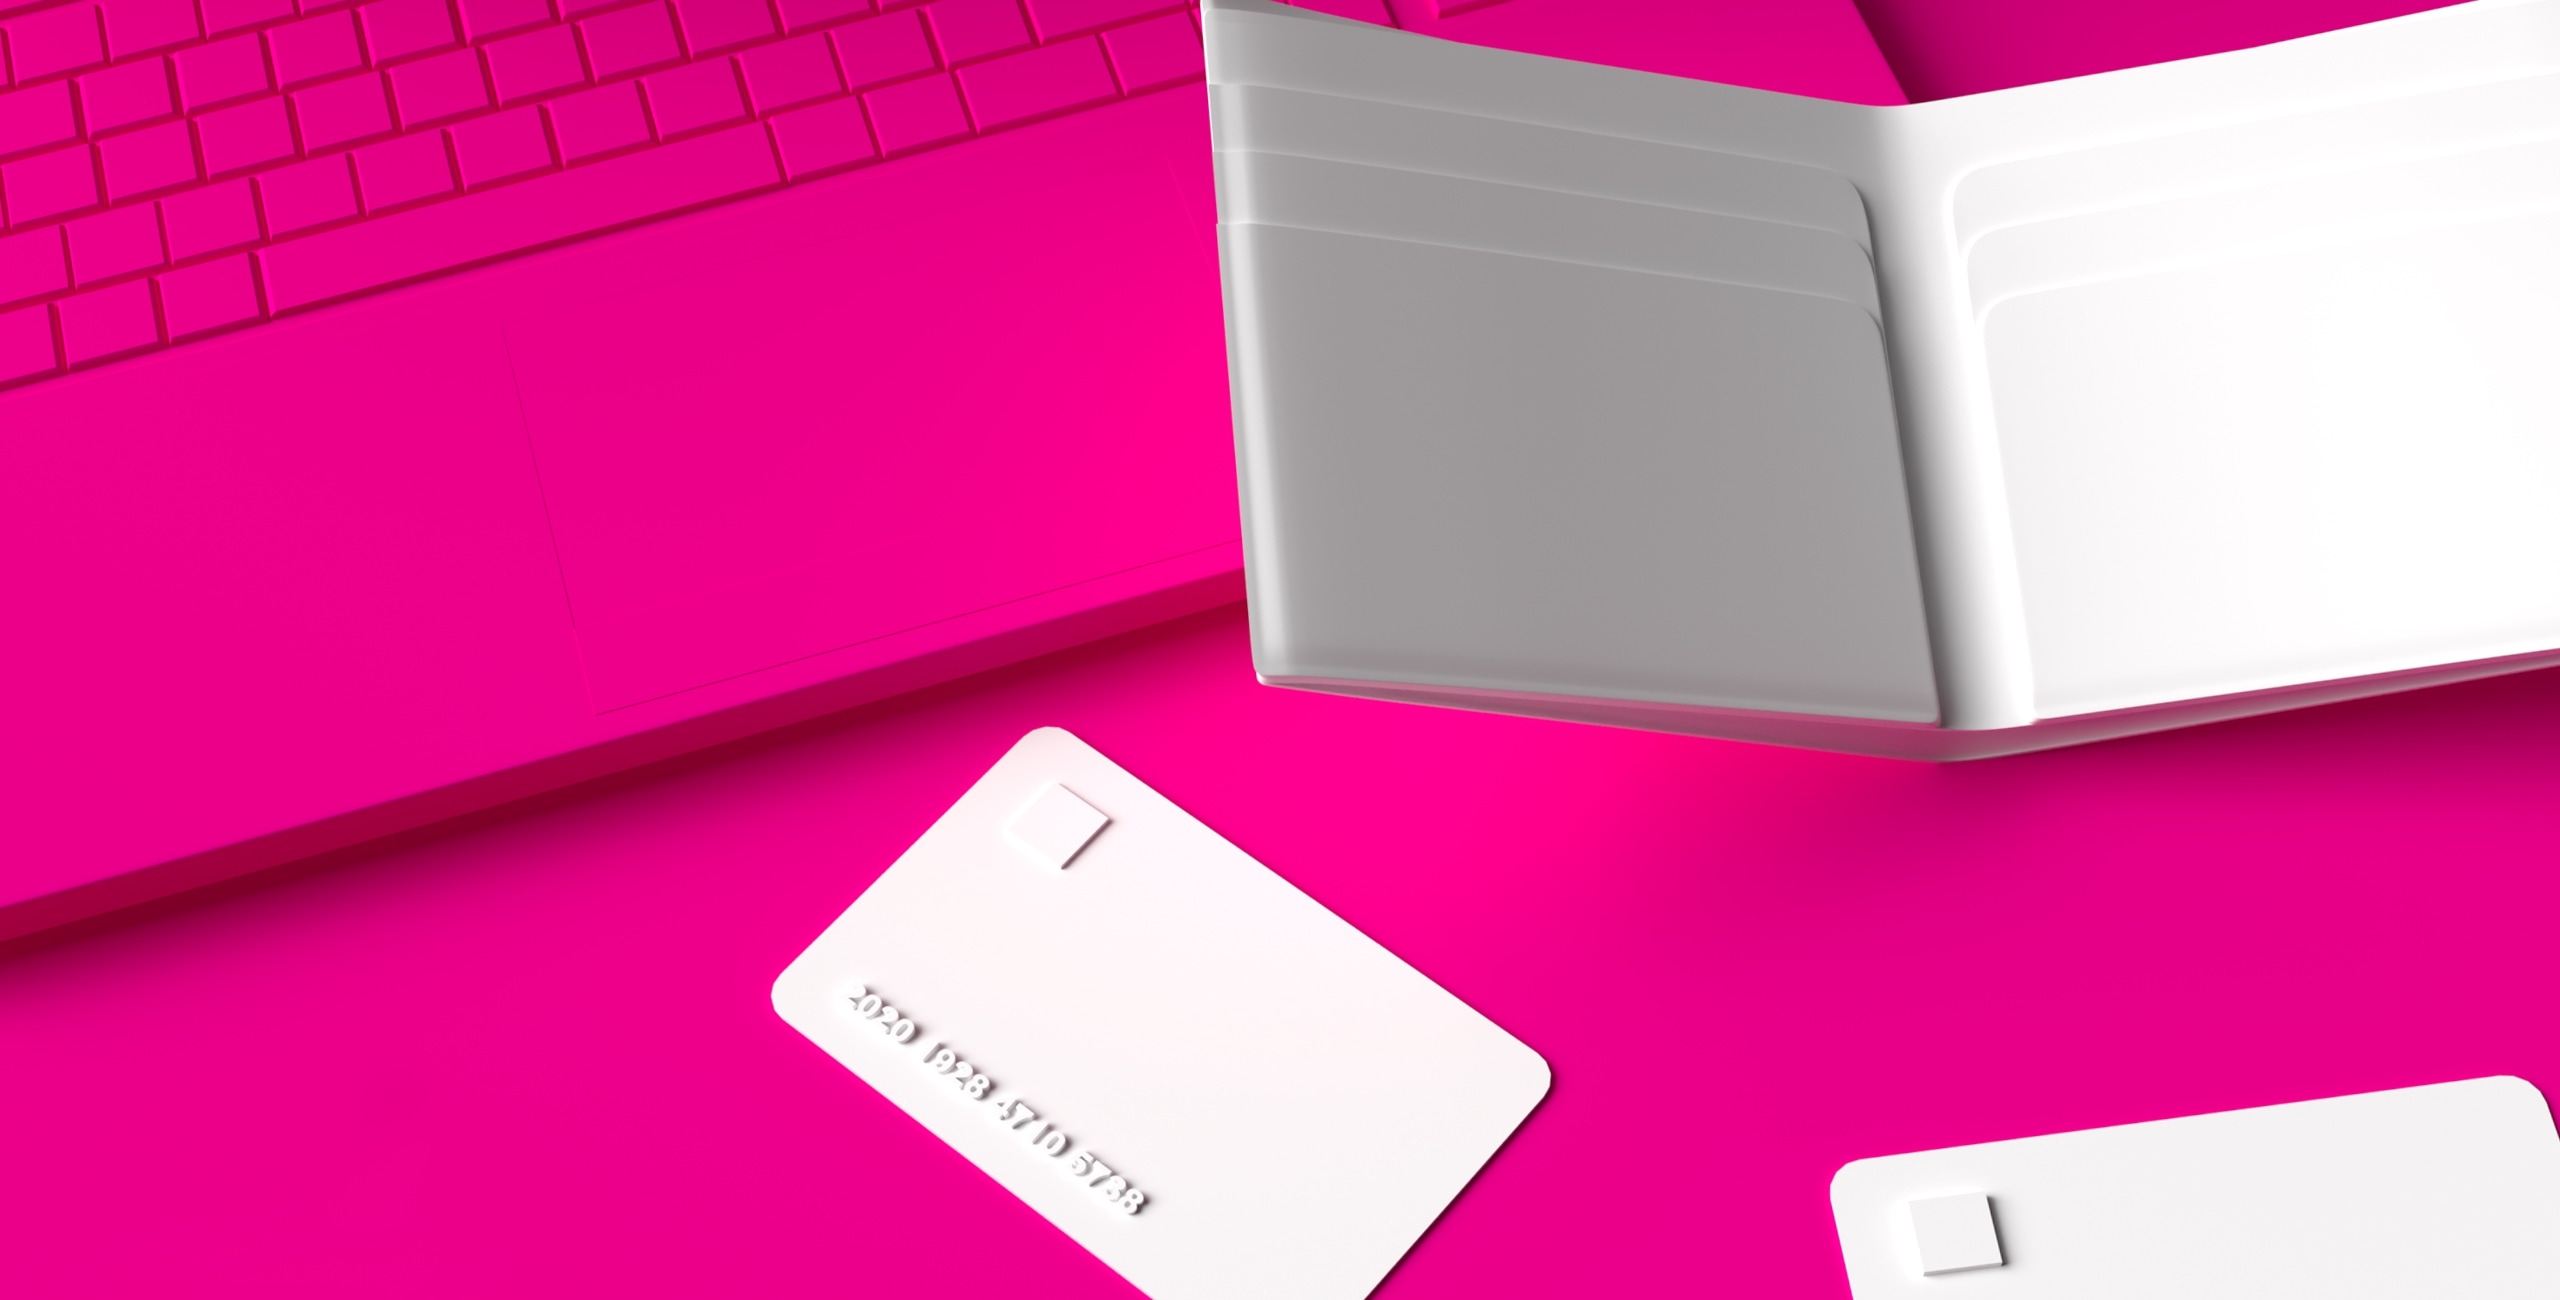 A laptop on a pink background with a white book and credit cards.